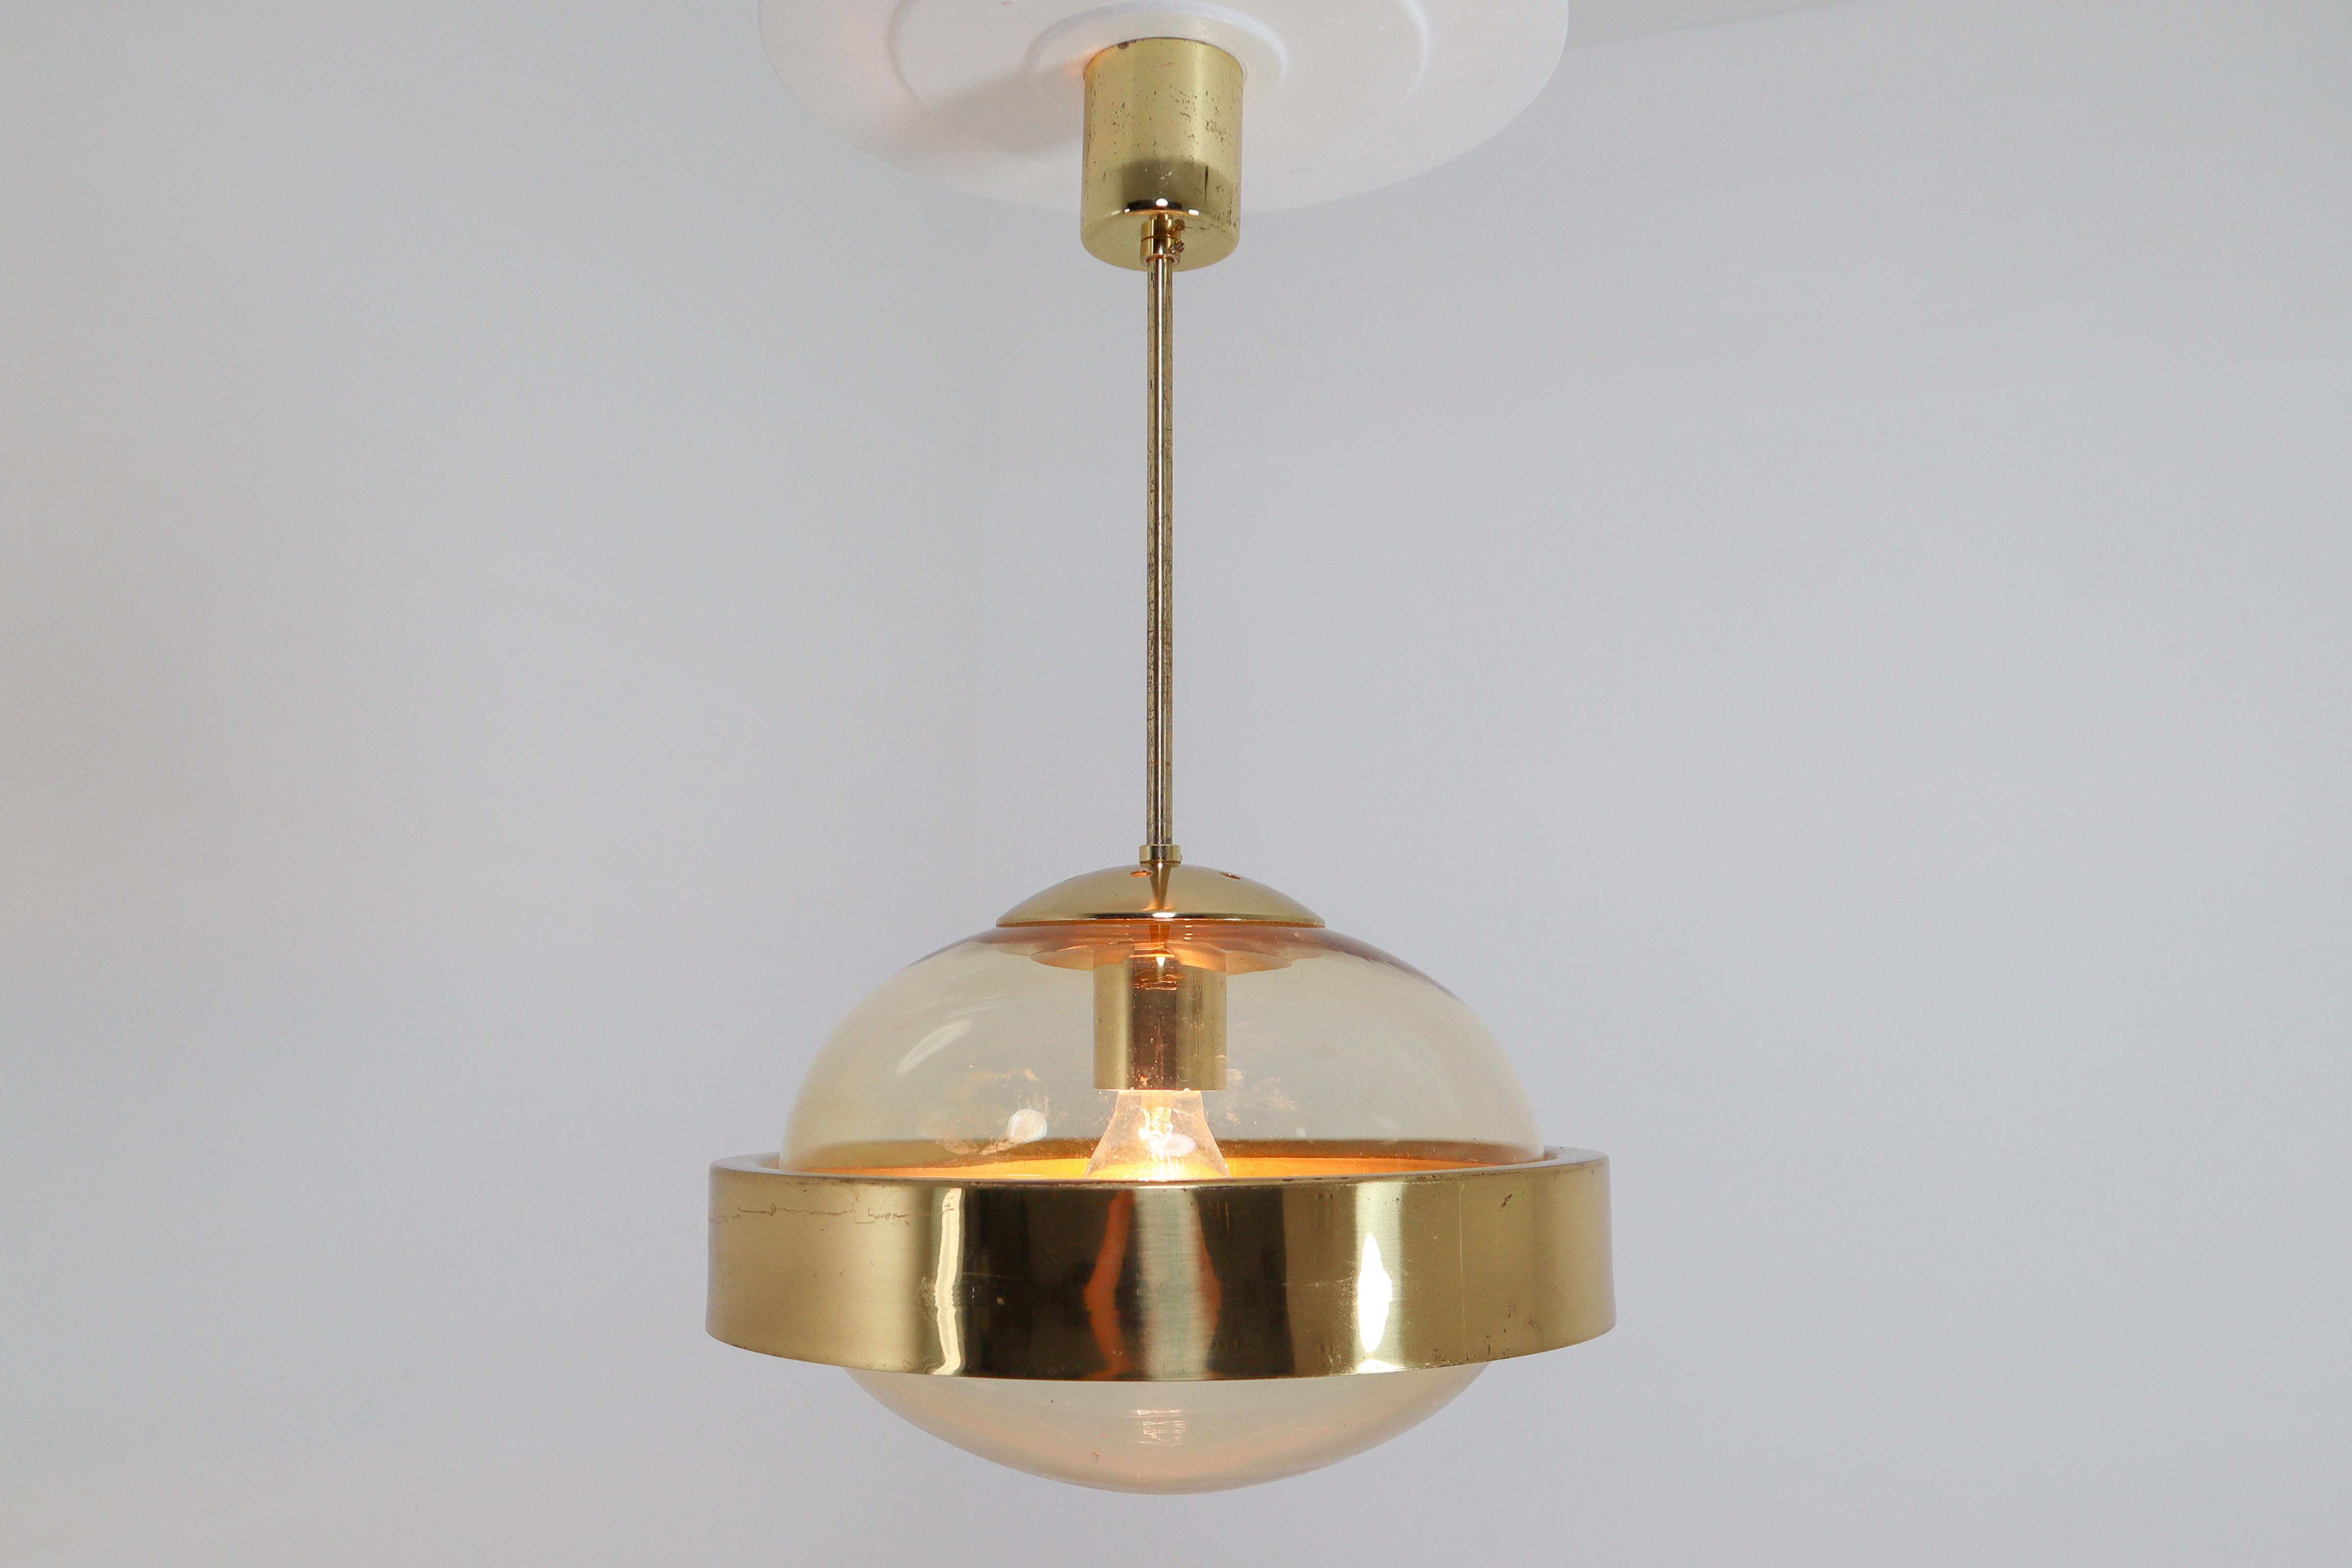 Austrian Mid-Century Modernist Hand-Blowed Glass and Brass Pendant, 1960s For Sale